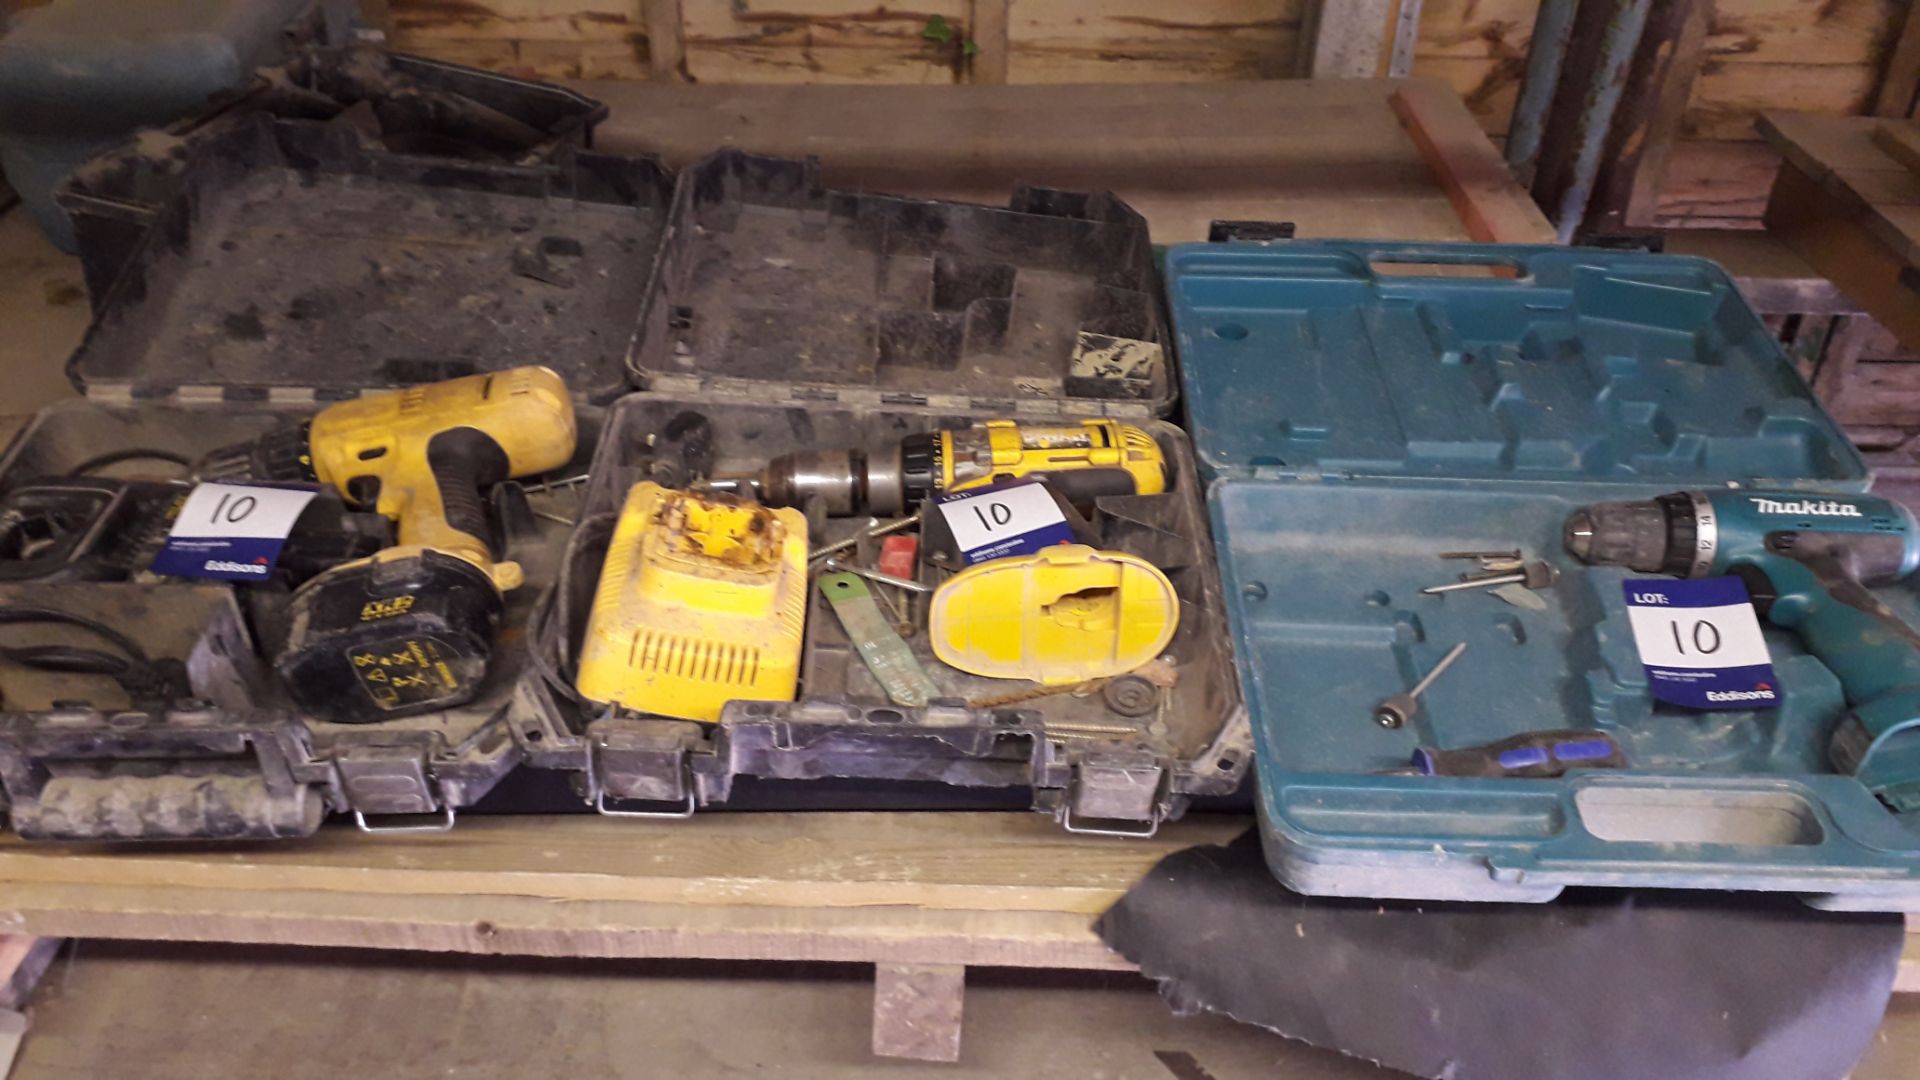 2 x Dewalt and 1 Makita Cordless Drills (Without Batteries)